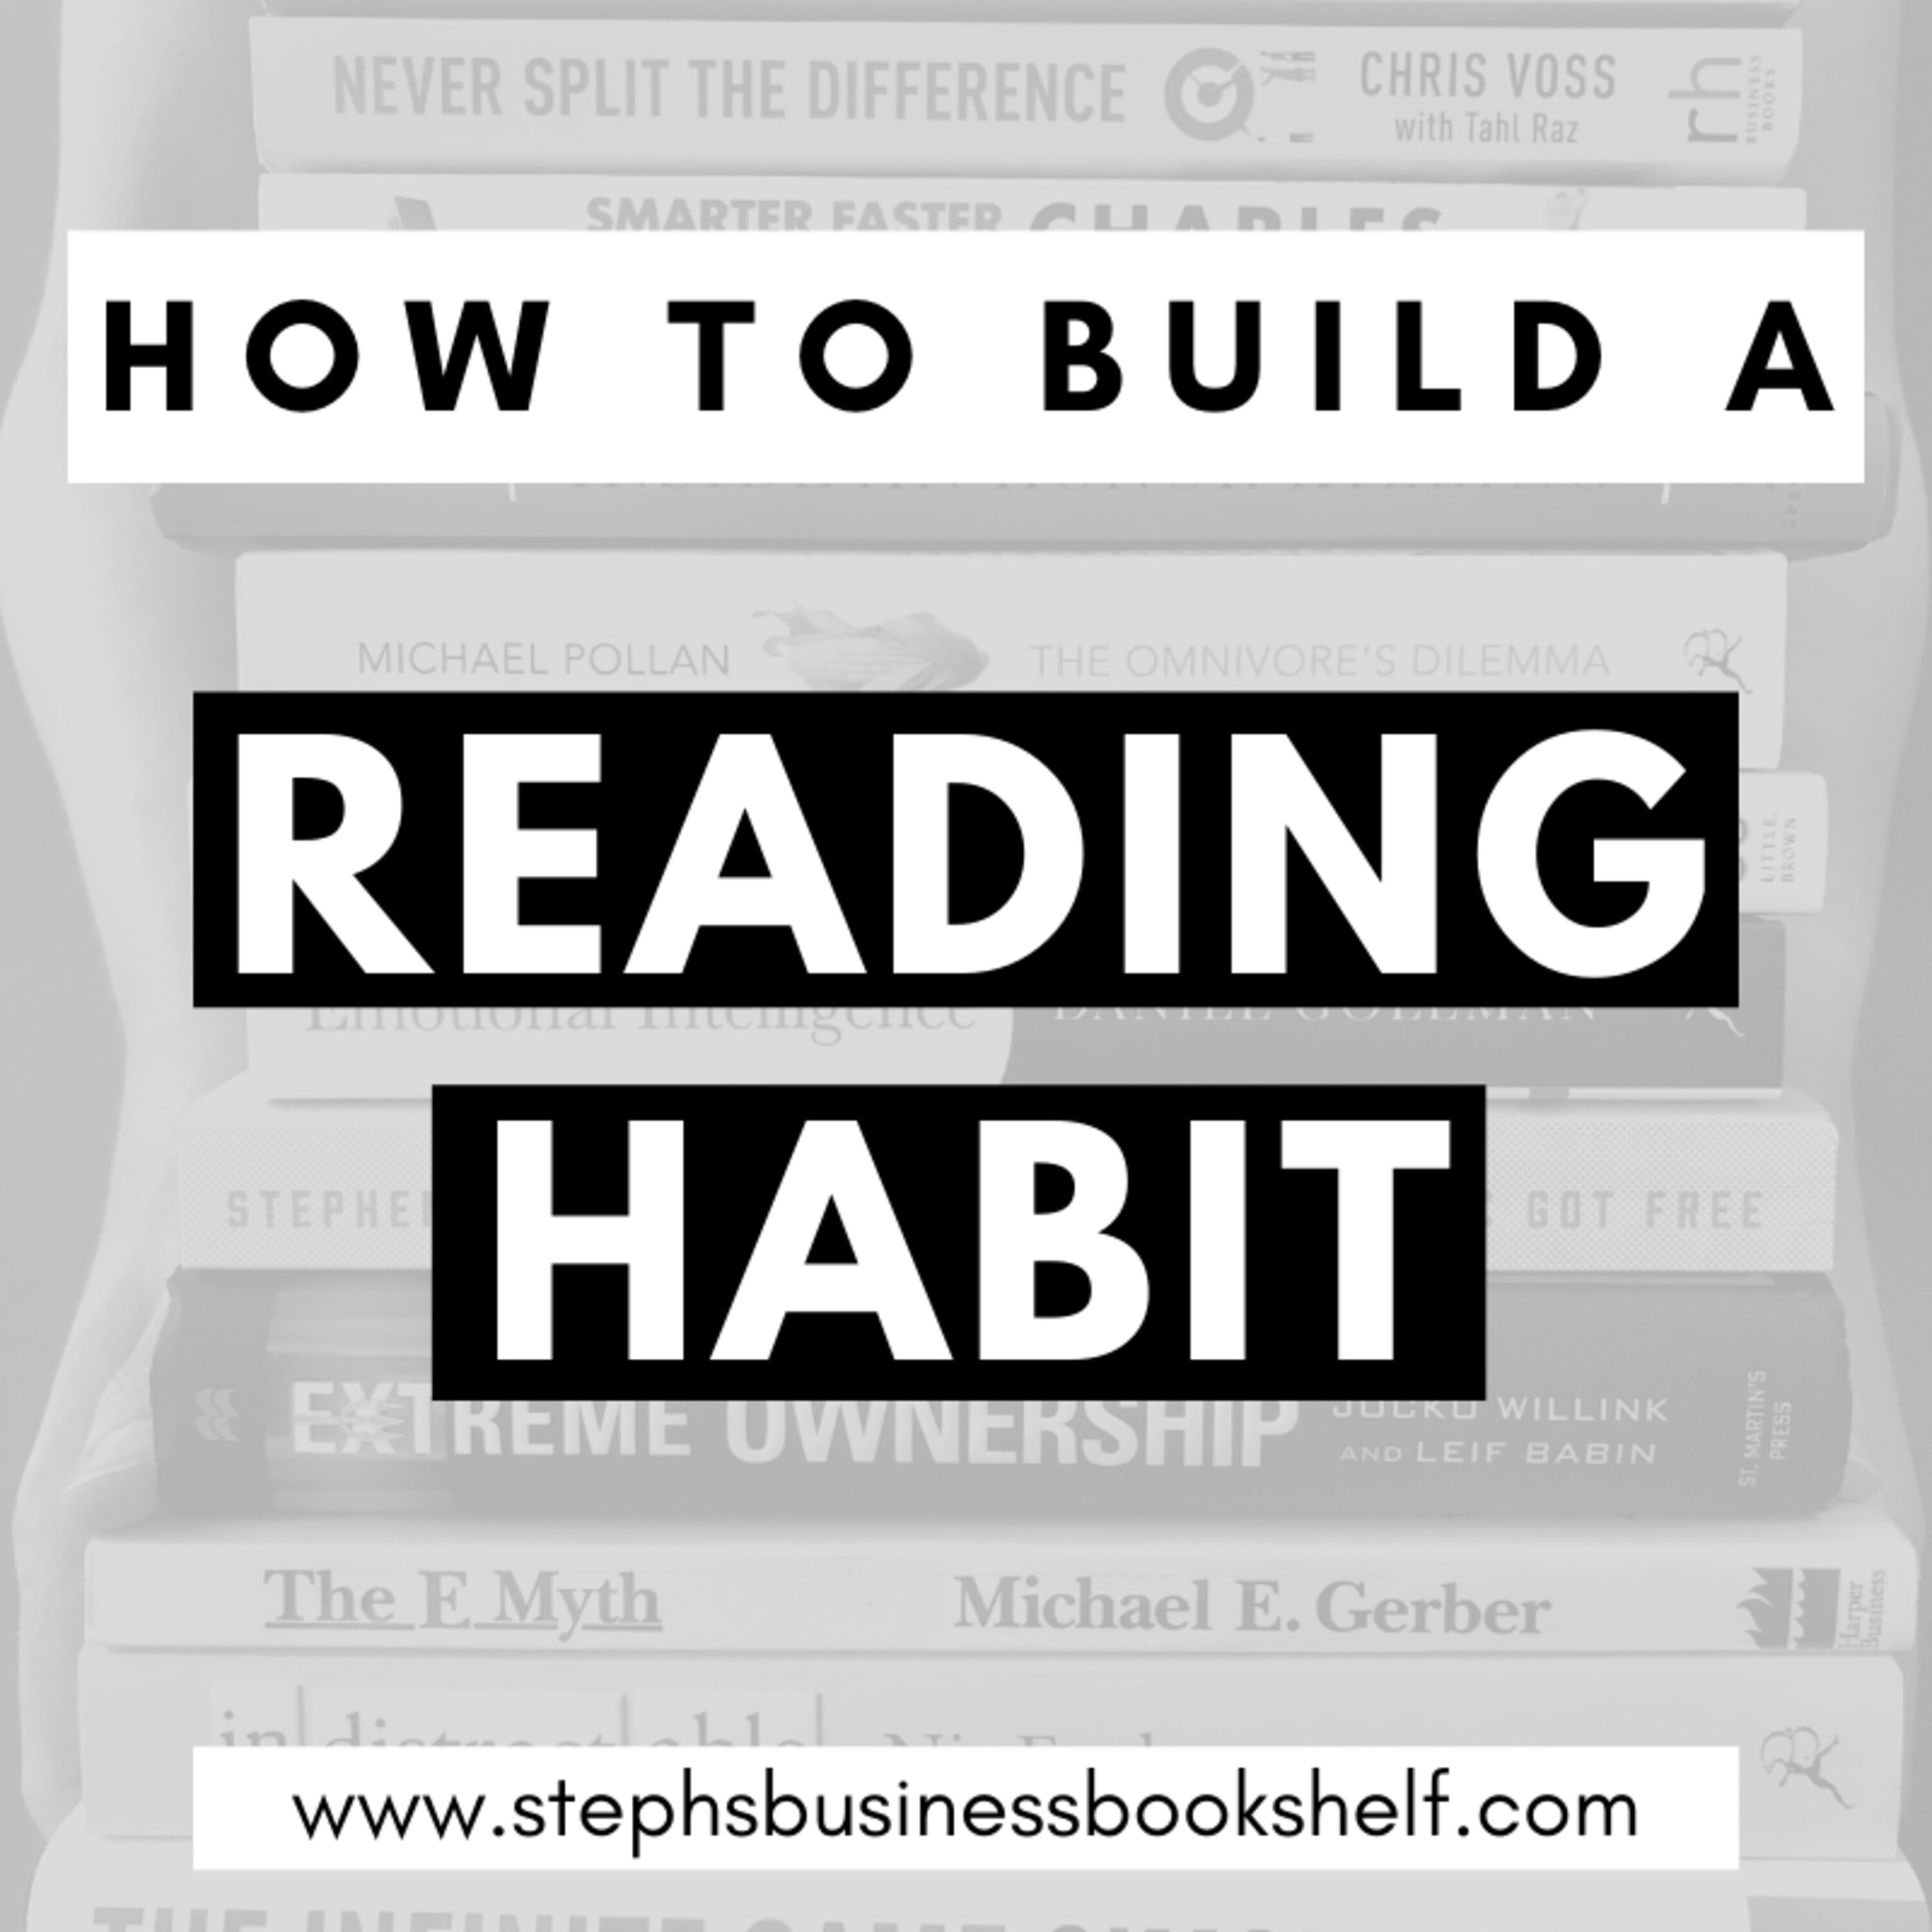 How to Build a Reading Habit: Five tips to help you read more books in 2020 Image